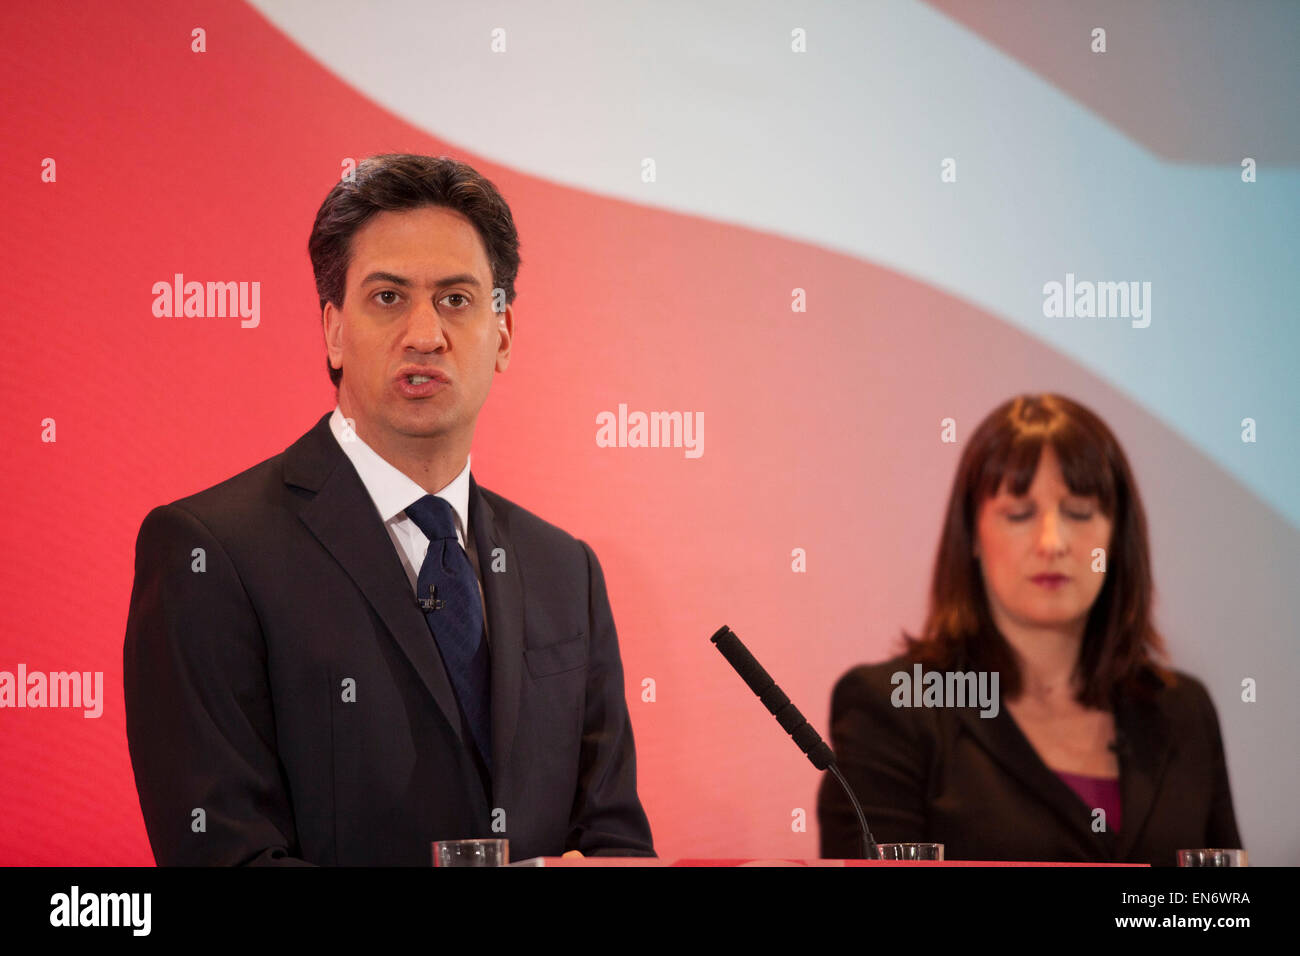 London, UK. Wednesday 29th April 2015. Labour Party Leader Ed Miliband and Shadow Secretary of State for Work and Pensions Rachel Reeves at a General Election 2015 campaign event on the Tory threat to family finances, entitled: The Tories’ Secret Plan. Held at the Royal Institute of British Architects. Credit:  Michael Kemp/Alamy Live News Stock Photo